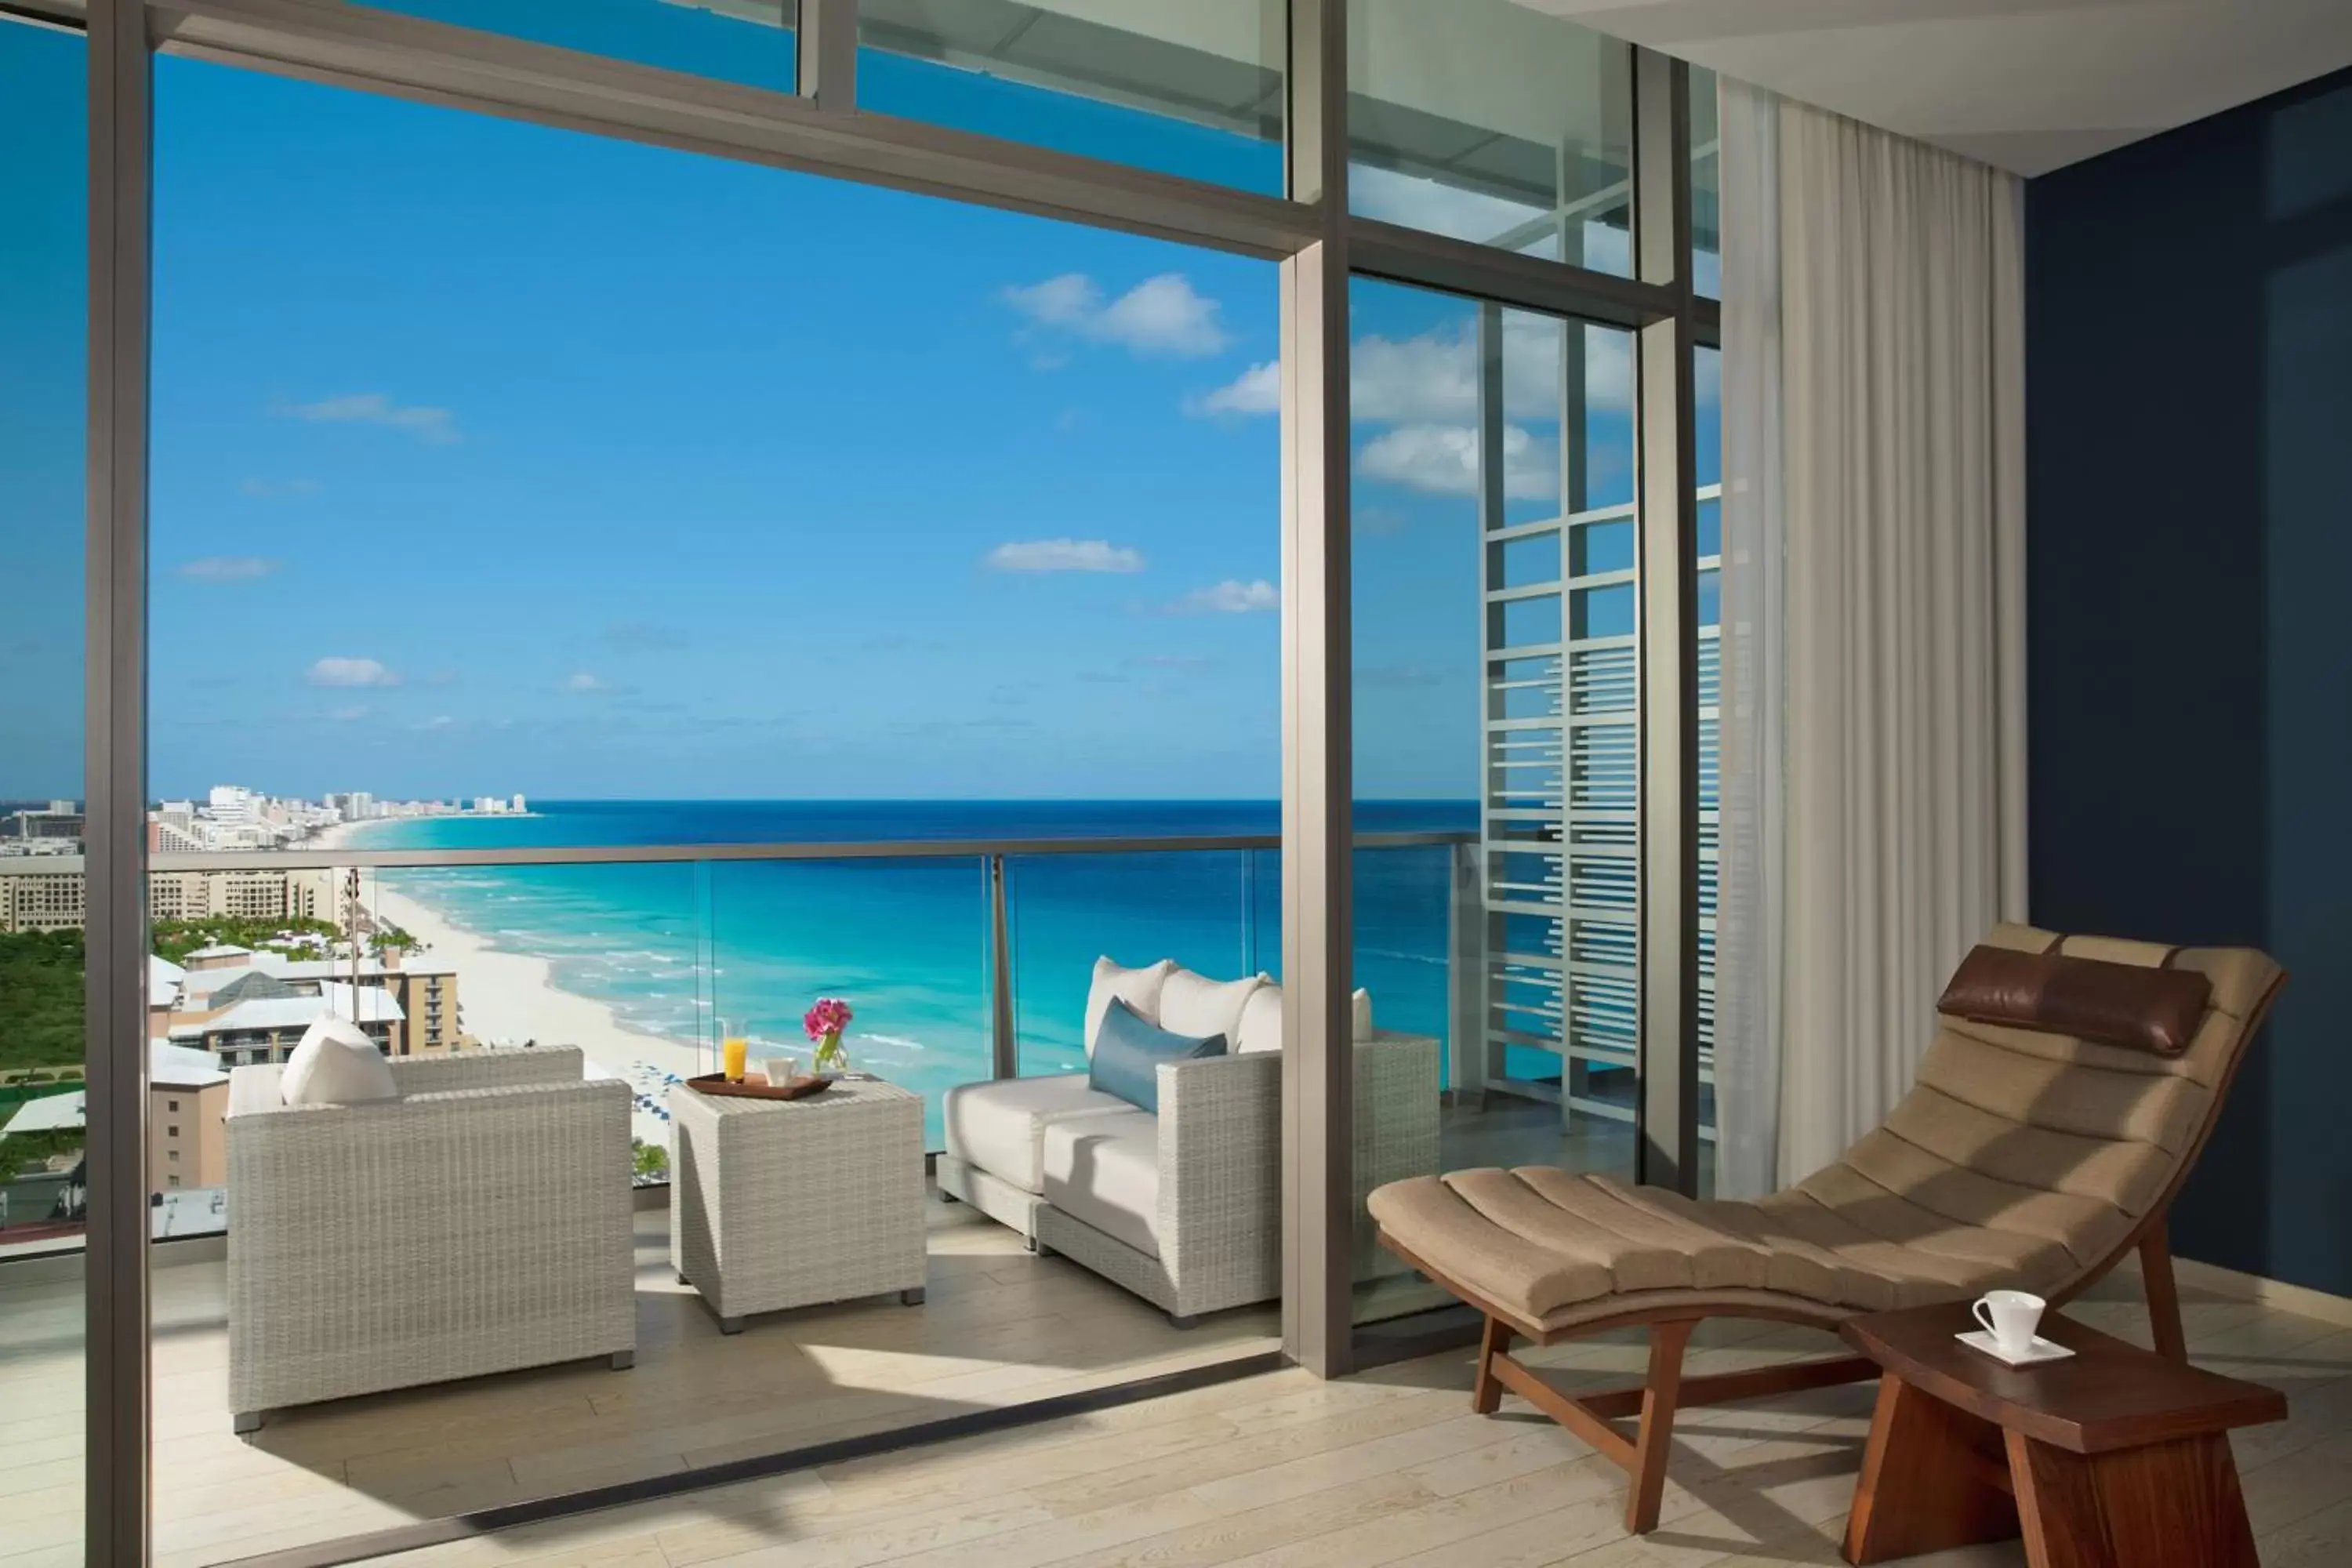 Sea view in Secrets The Vine Cancun - All Inclusive Adults Only